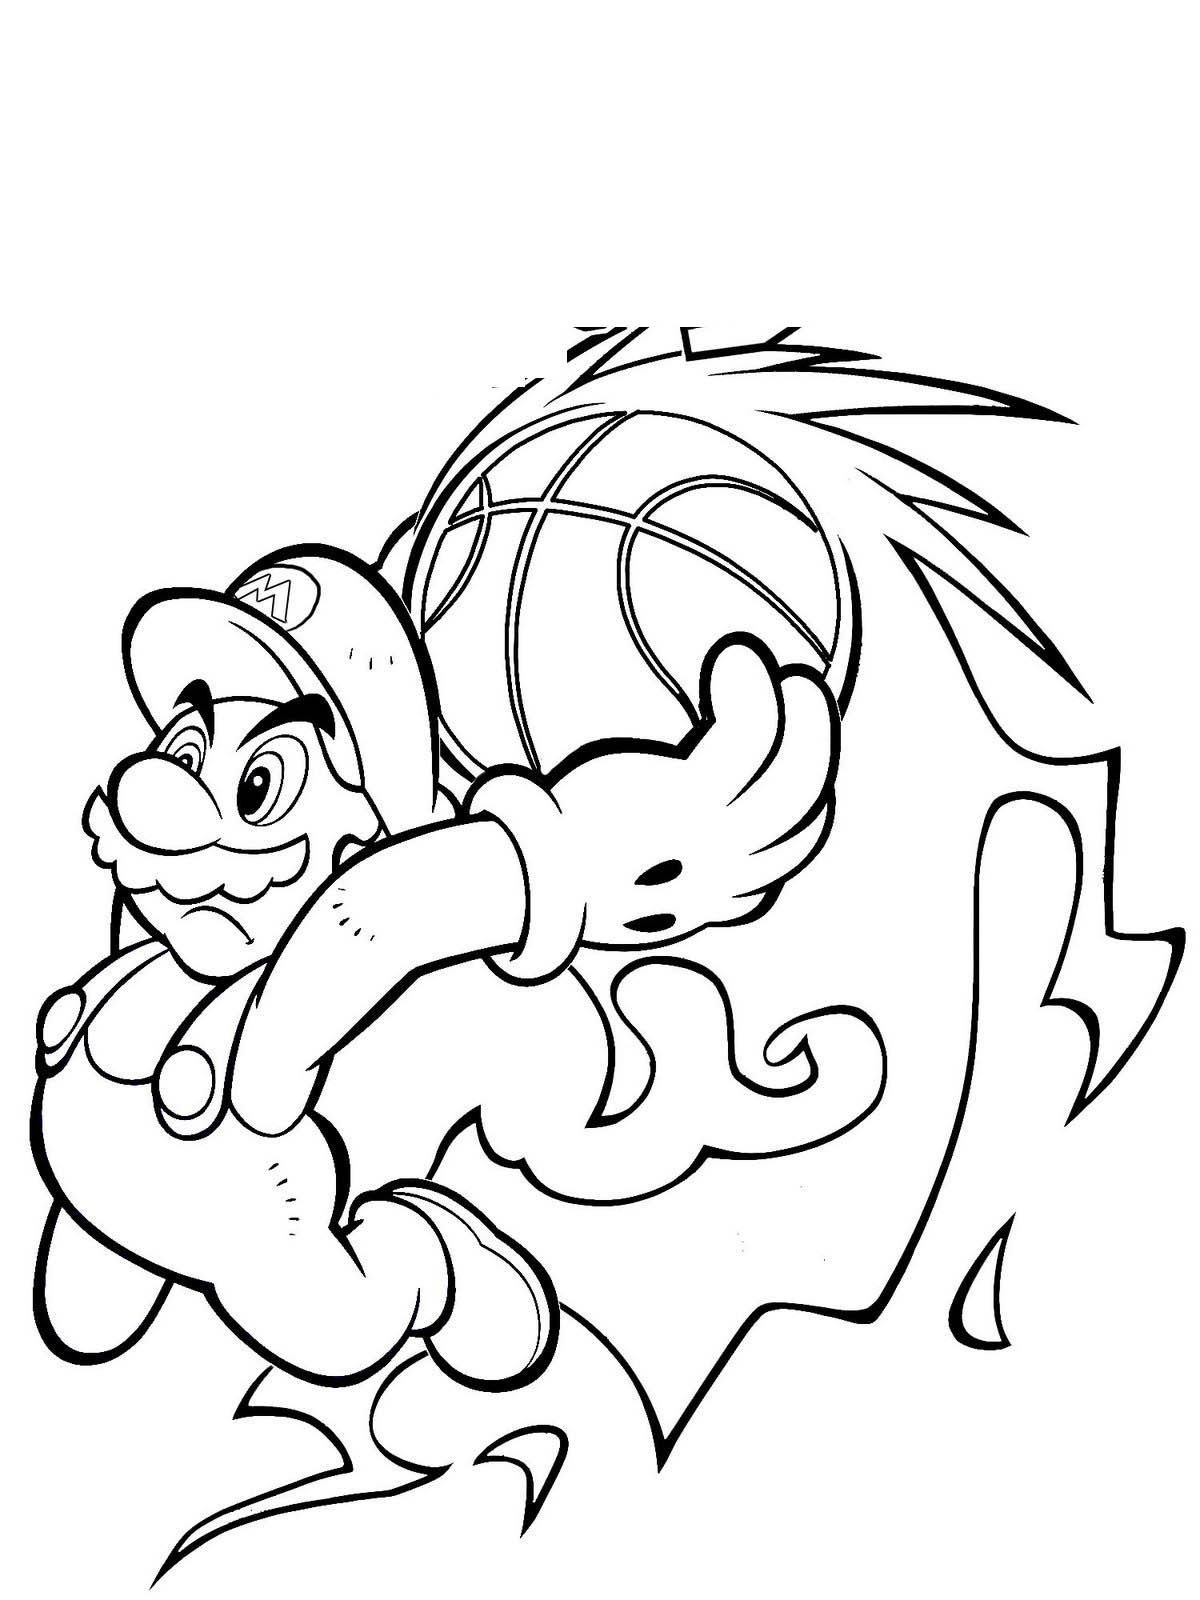 Download Super Mario Coloring Pages ~ Free Printable Coloring Pages - Cool Coloring Pages